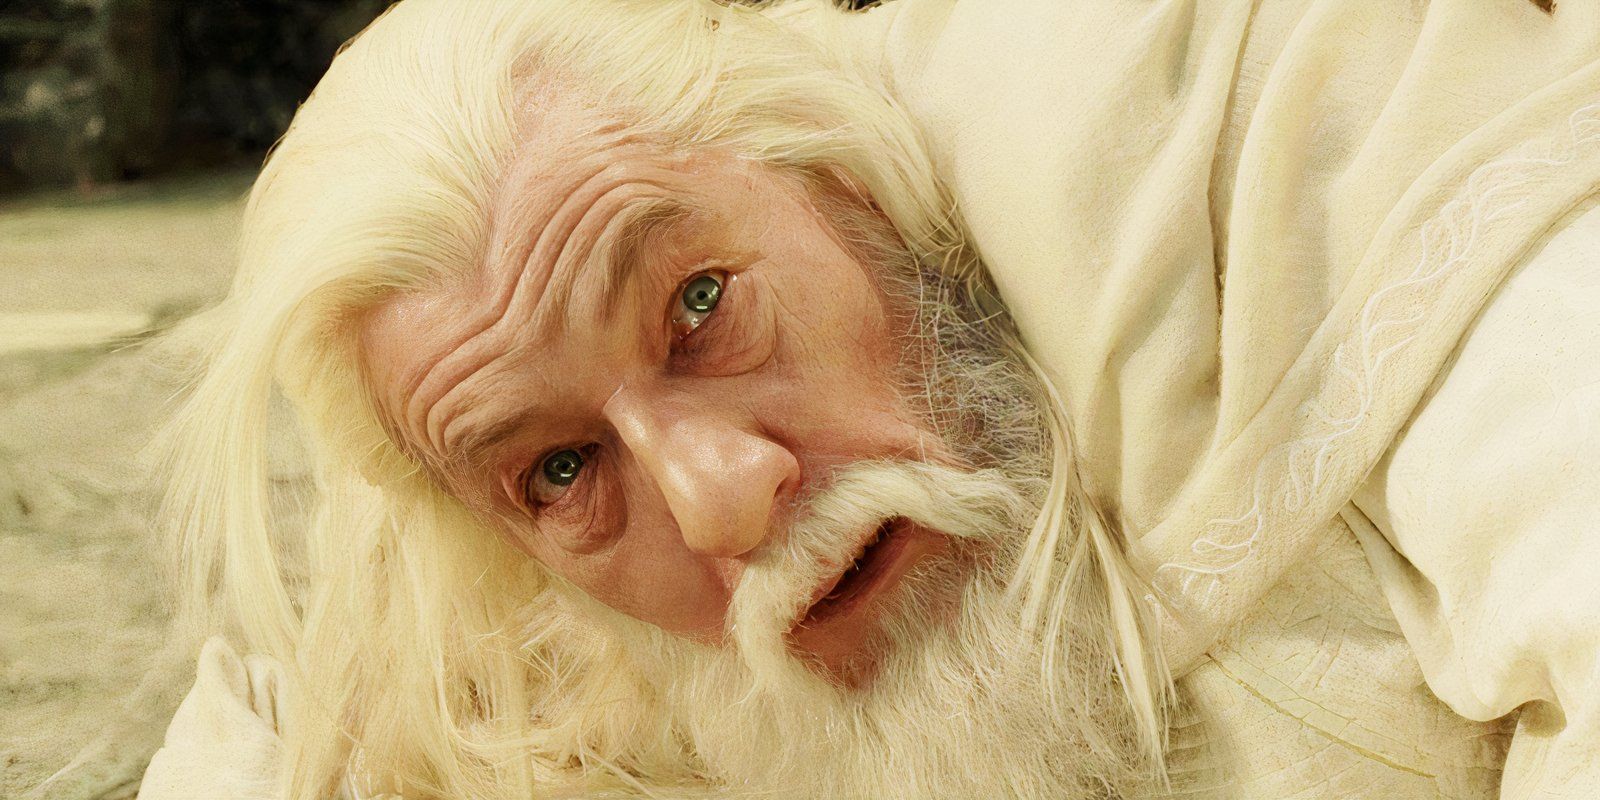 Ian McKellen as Gandalf in The Lord of the Rings The Return of the King